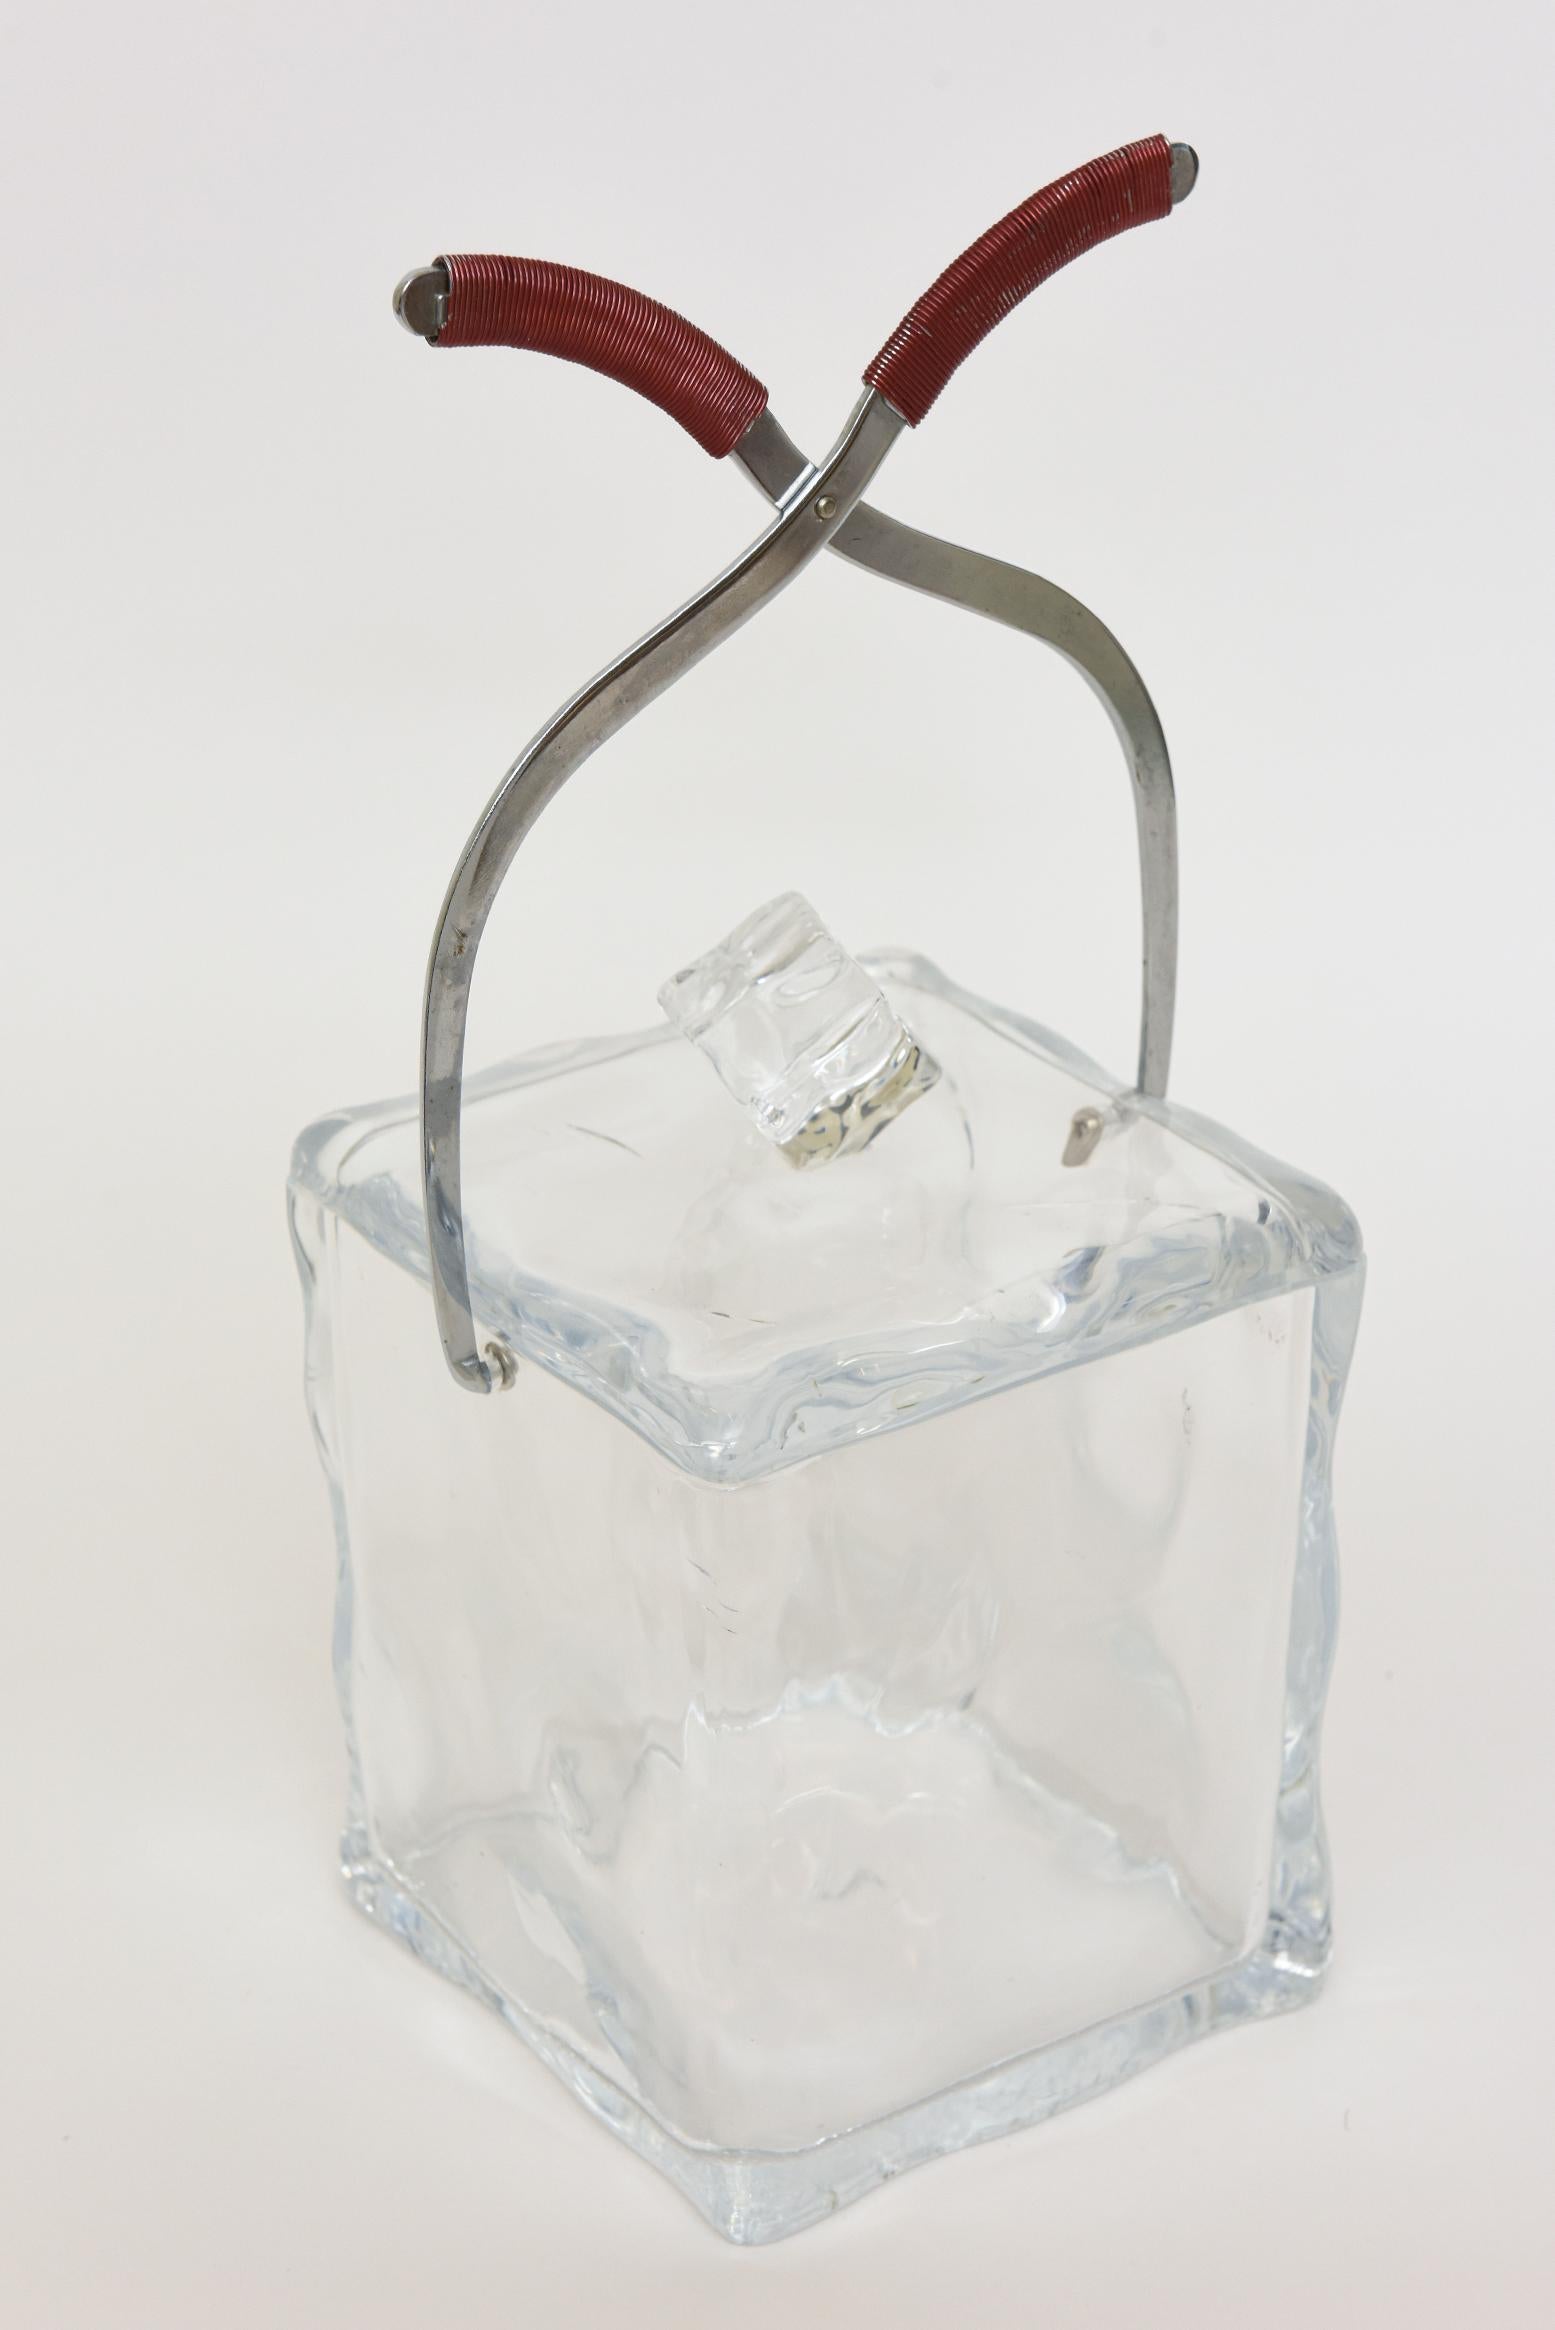 This Italian fun vintage square clear lucite ice bucket has the chrome plated twisted tongs that act as the handles with wrapped red wire at the top. The tongs fold down. From the late 60's. To the top is an ice cube that is set off center on an